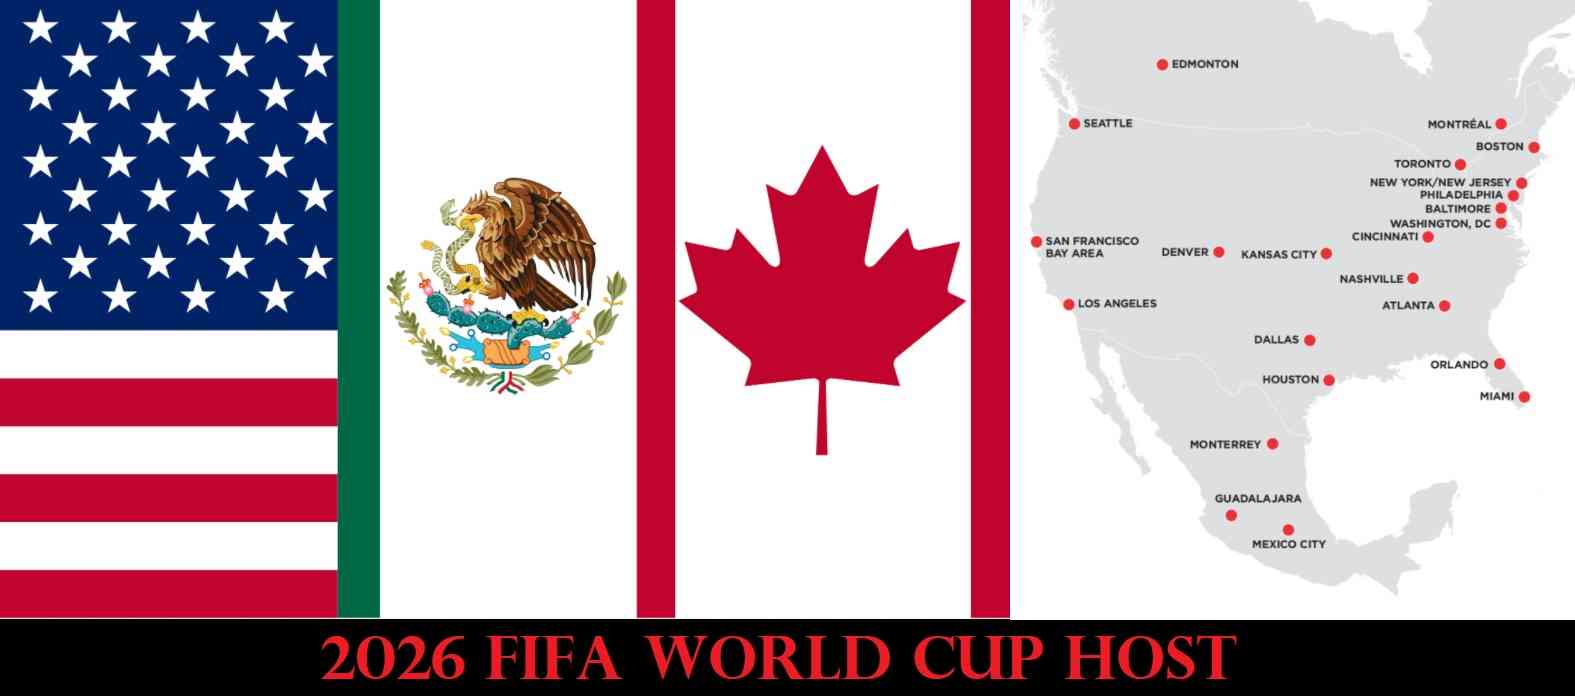 2026 FIFA World Cup Venues and Cities